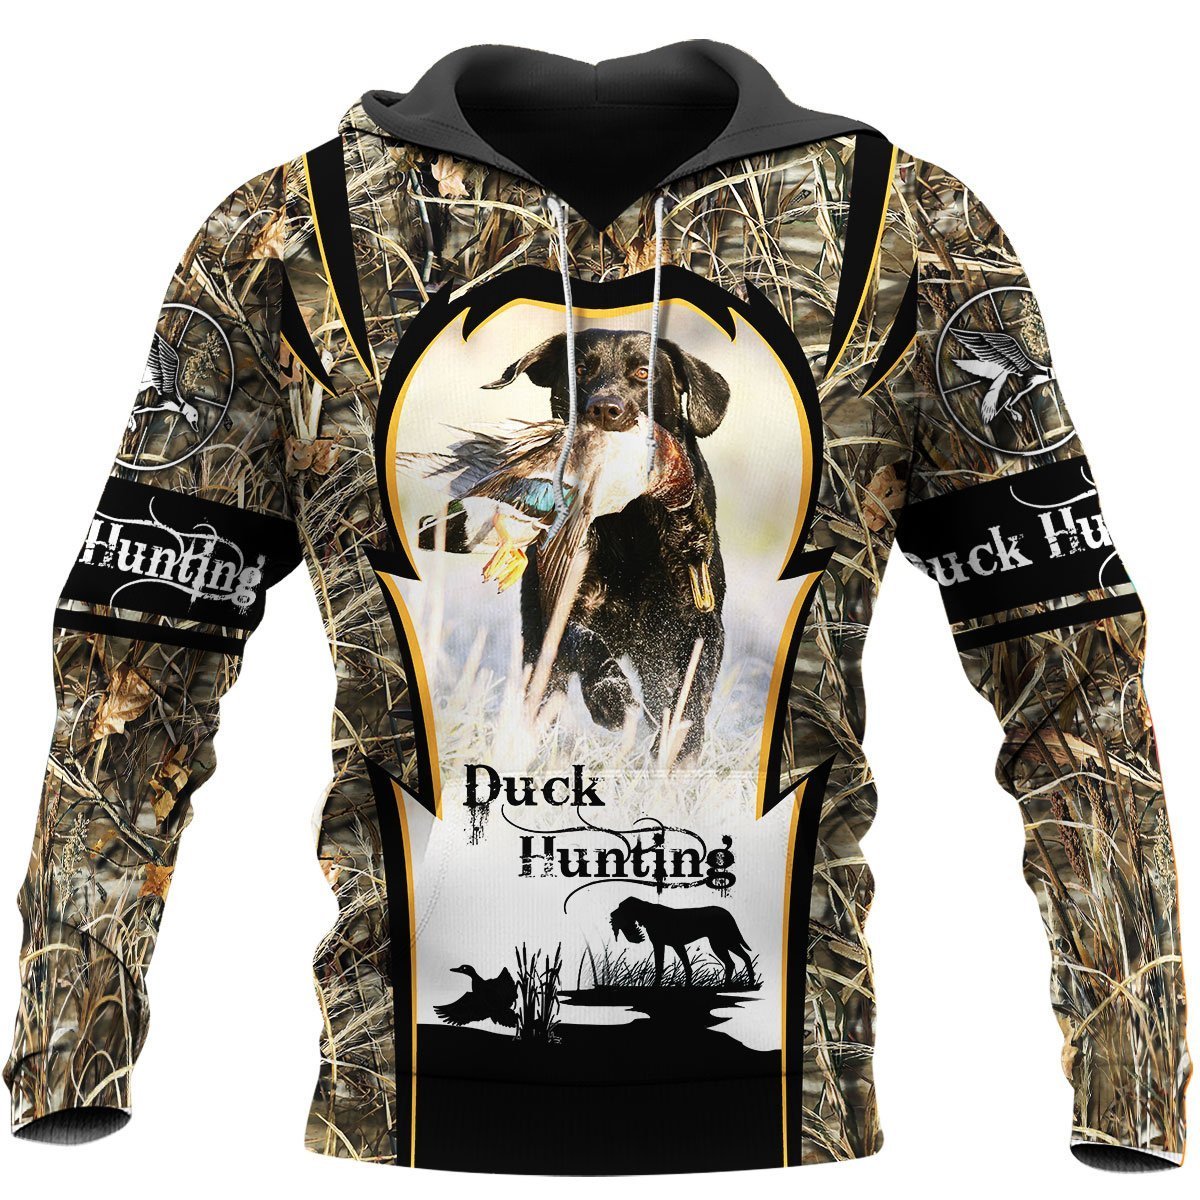  Hunting T-shirt Duck Hunting With Hunting Dog 3d T-shirt Hoodie Adult Full Size